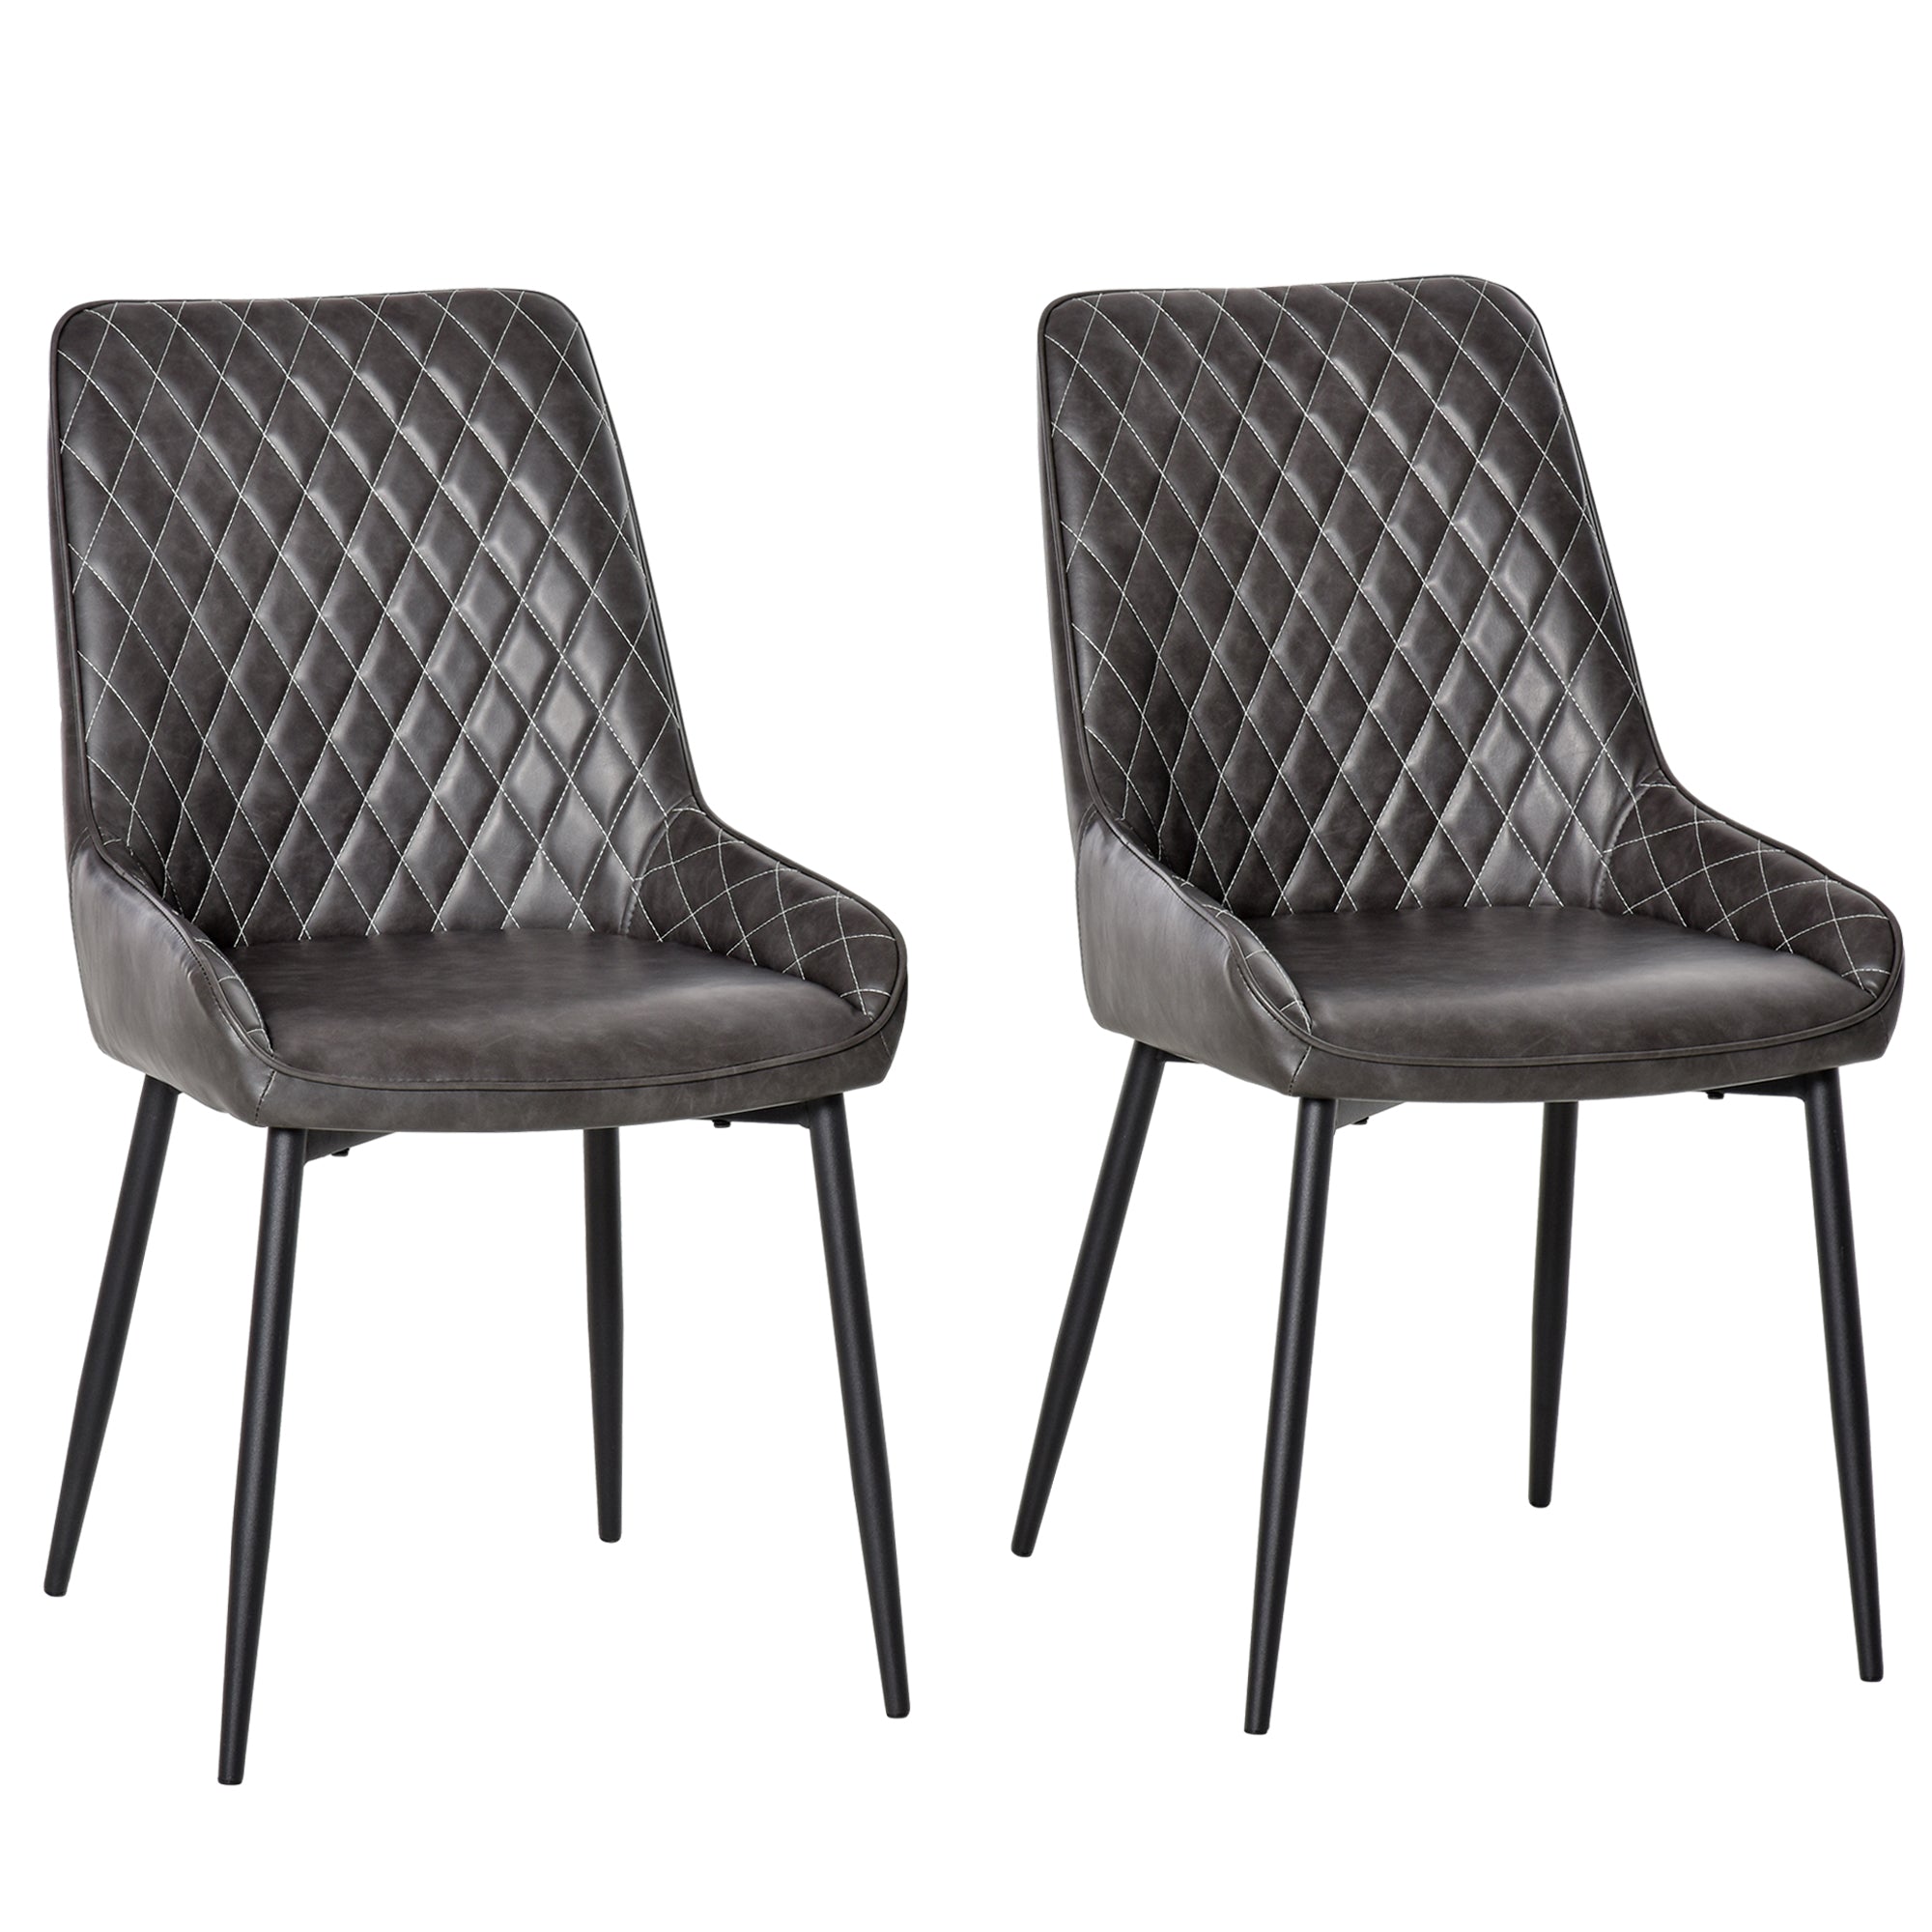 HOMCOM Retro Dining Chair Set of 2 - PU Leather Upholstered Side Chairs  | TJ Hughes